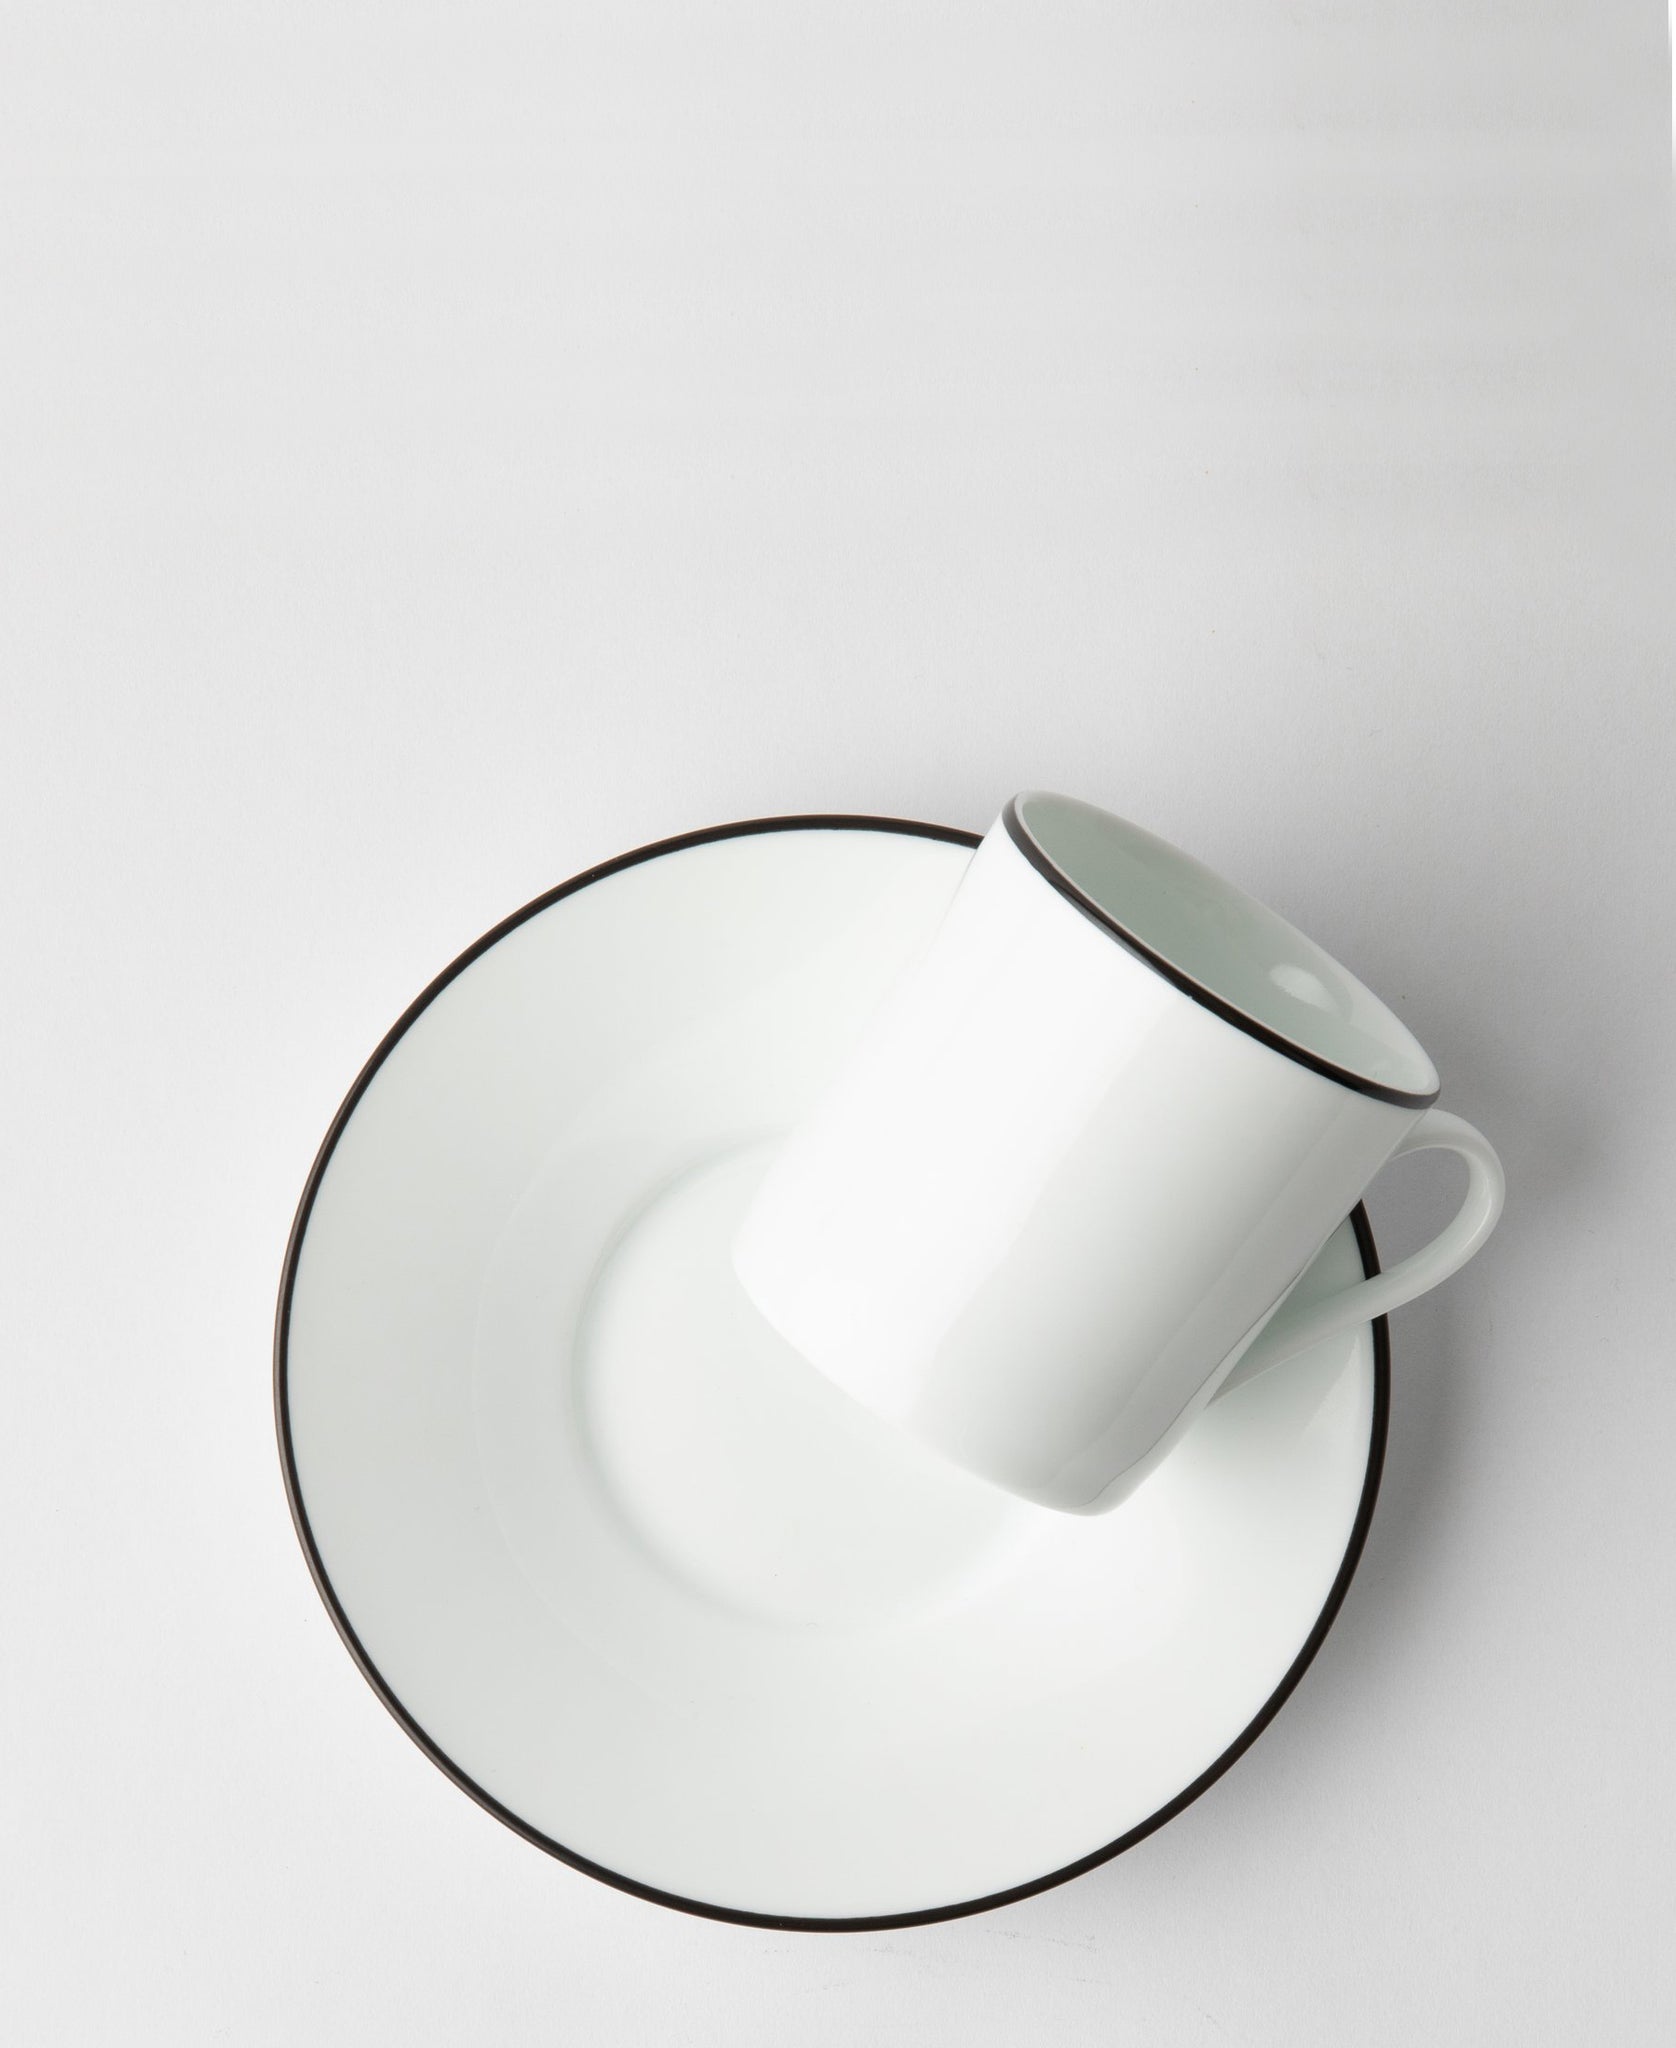 Jenna Clifford 100ml Espresso Cup & Saucer With Black Band - White